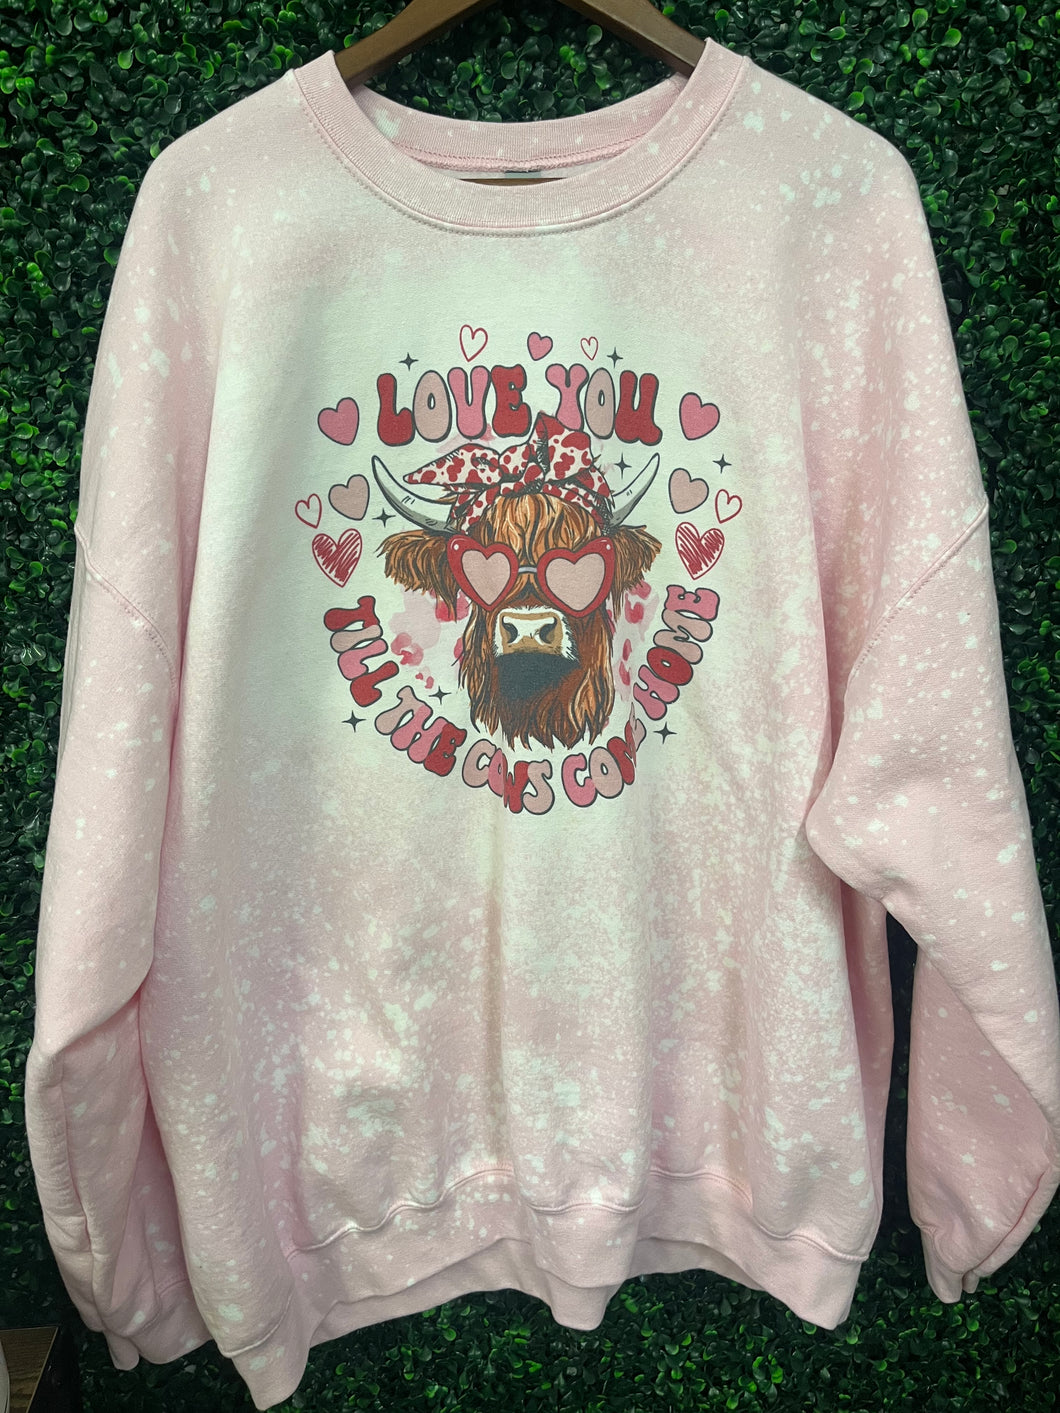 Size 3XL slightly imperfect Love you till the cows come home pink crewneck￼